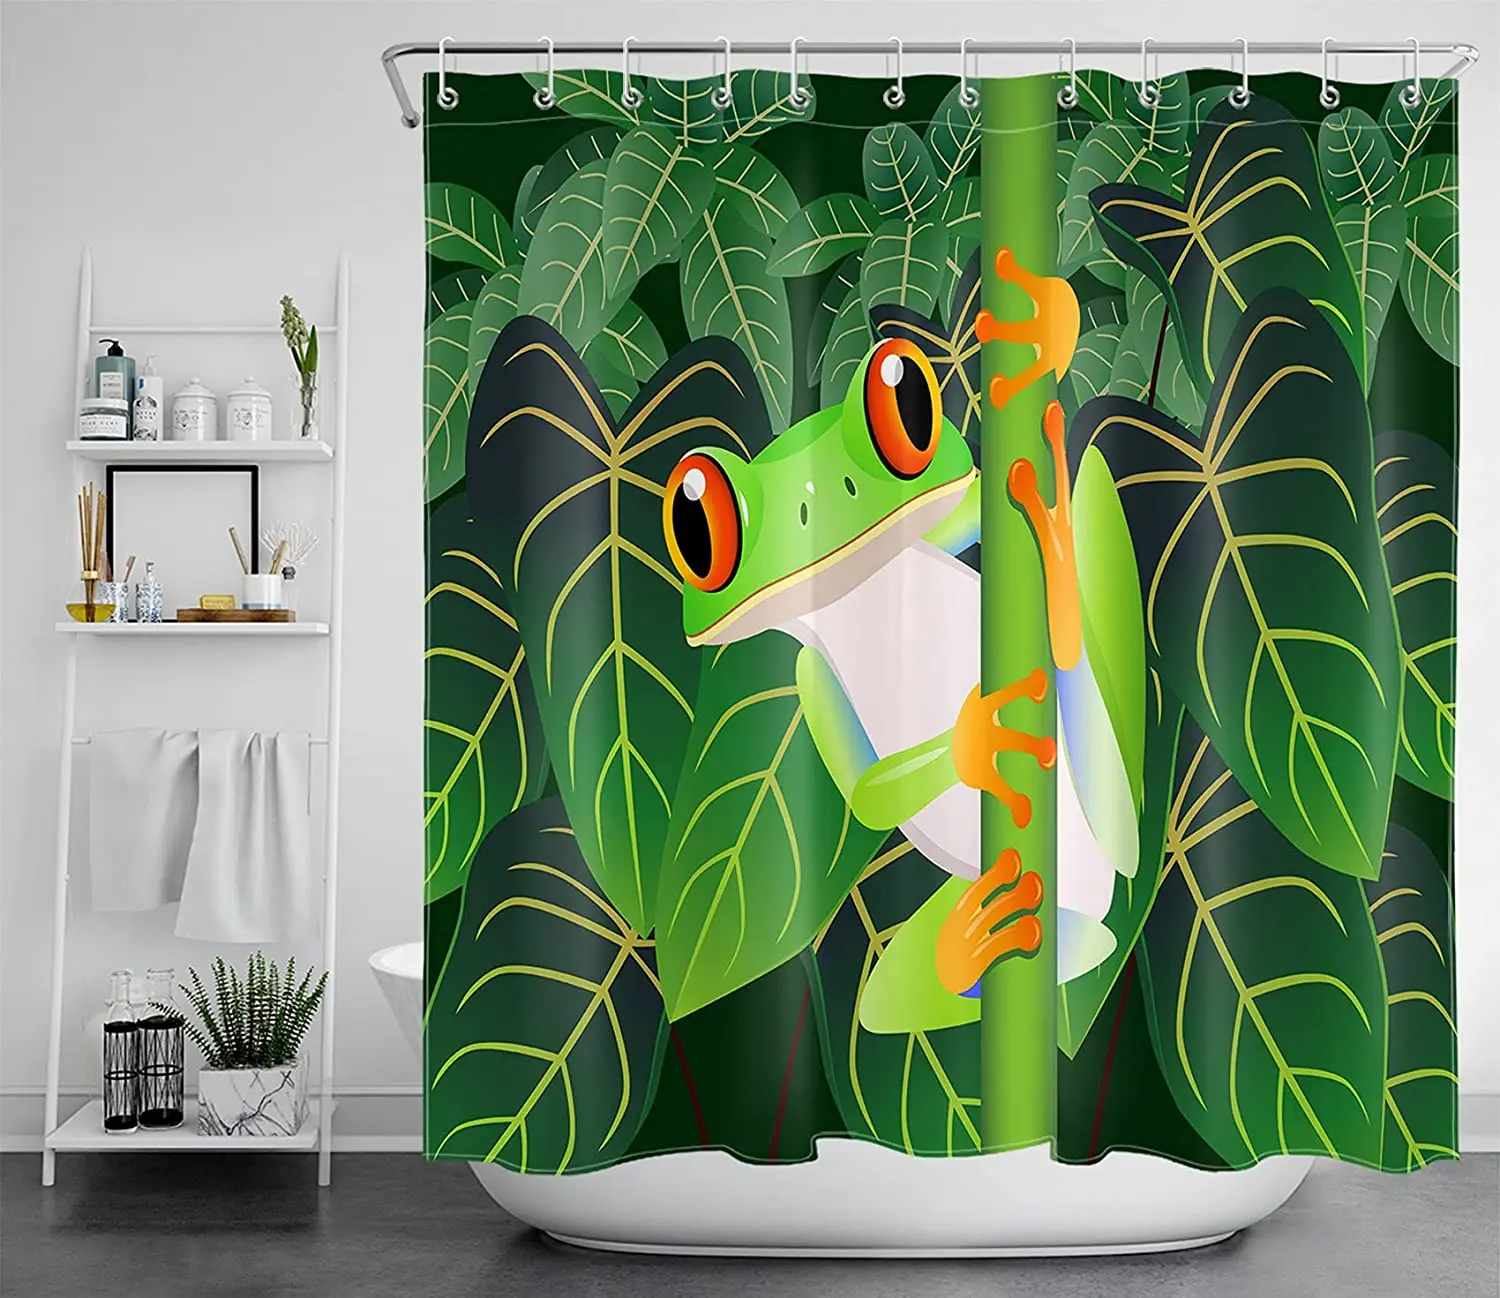 

Cute Frog with Green Palm Leaves in Forest Jungle Bathroom Shower Curtain Decor 3d Waterproof Polyester Fabric Bath Curtain